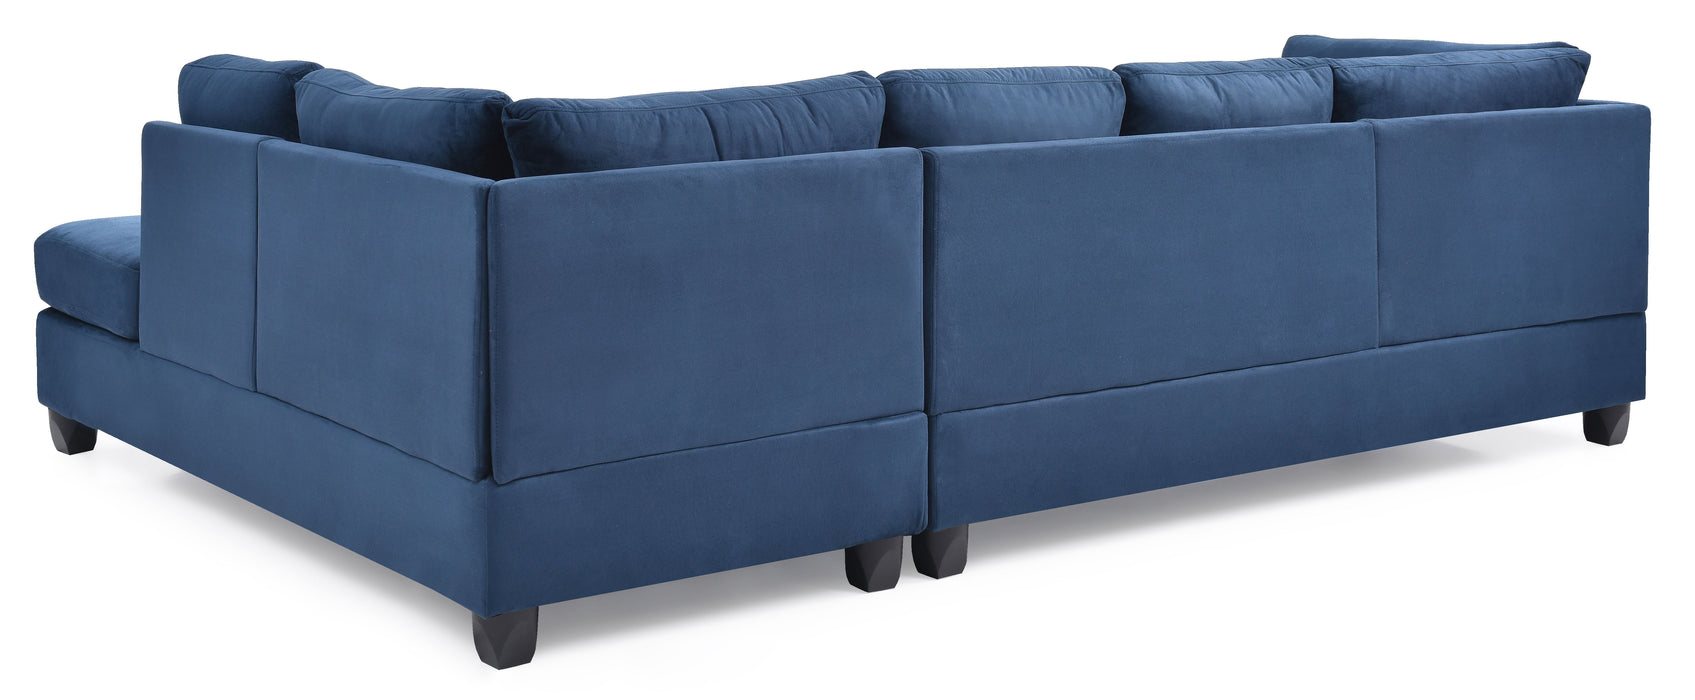 Glory Furniture Malone Sectional (3 Boxes), Navy Blue